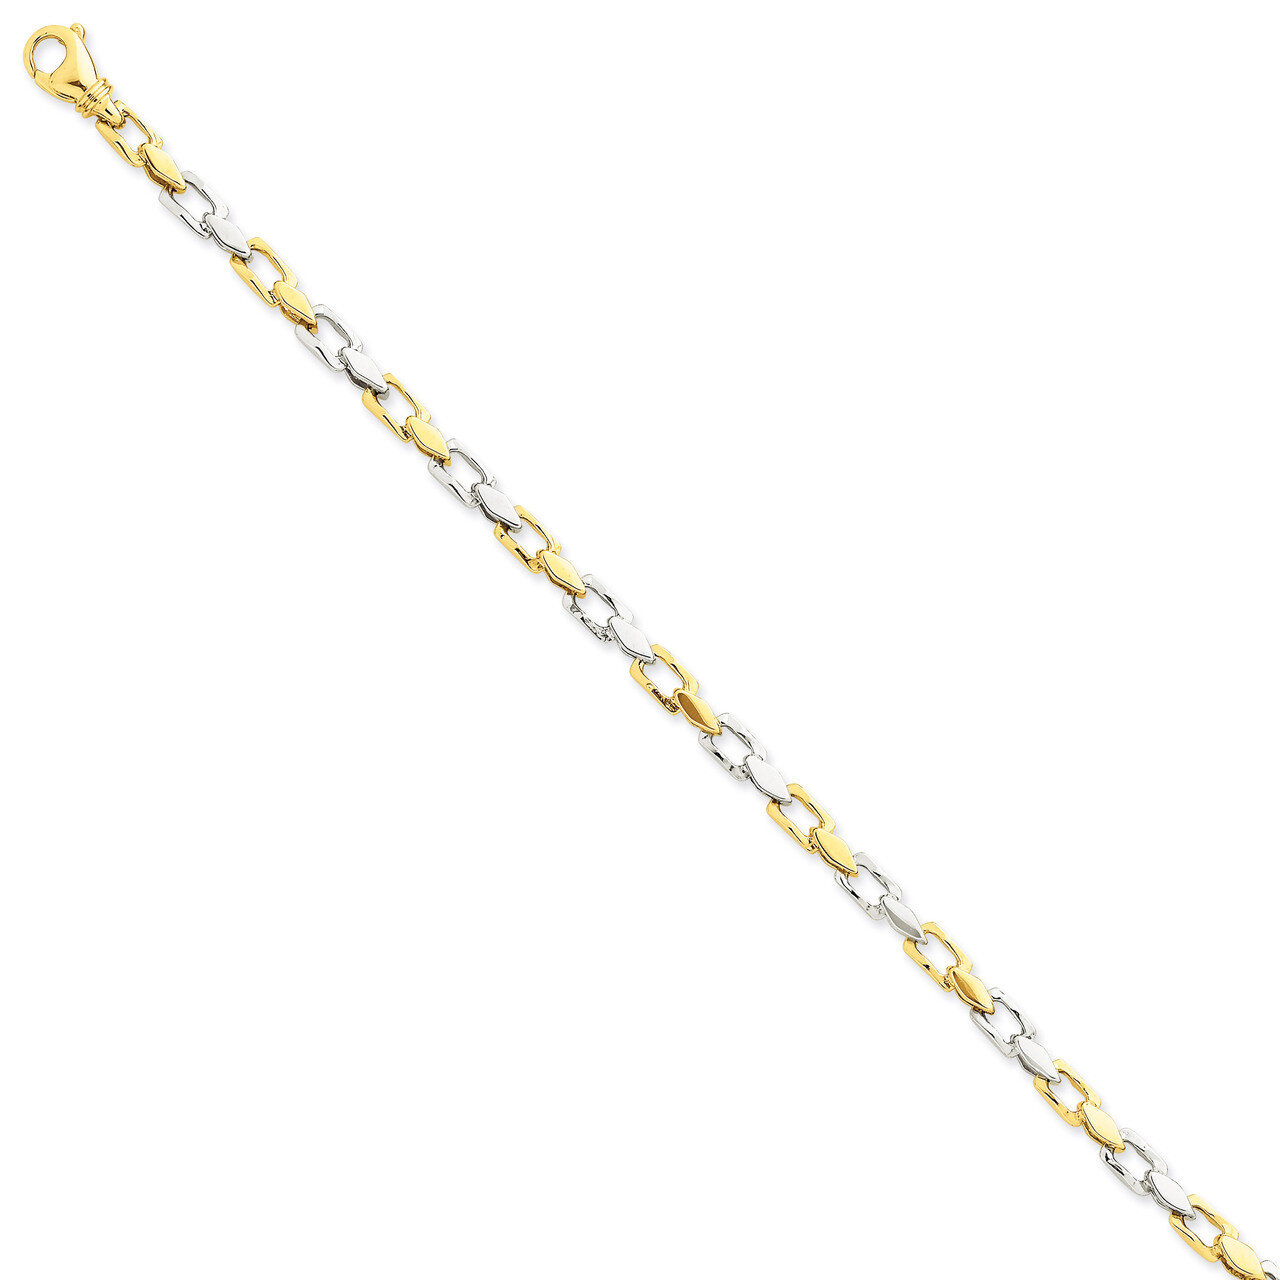 4.5mm Hand-Polished Fancy Link Chain 24 Inch 14k Two-Tone Gold LK305A-24